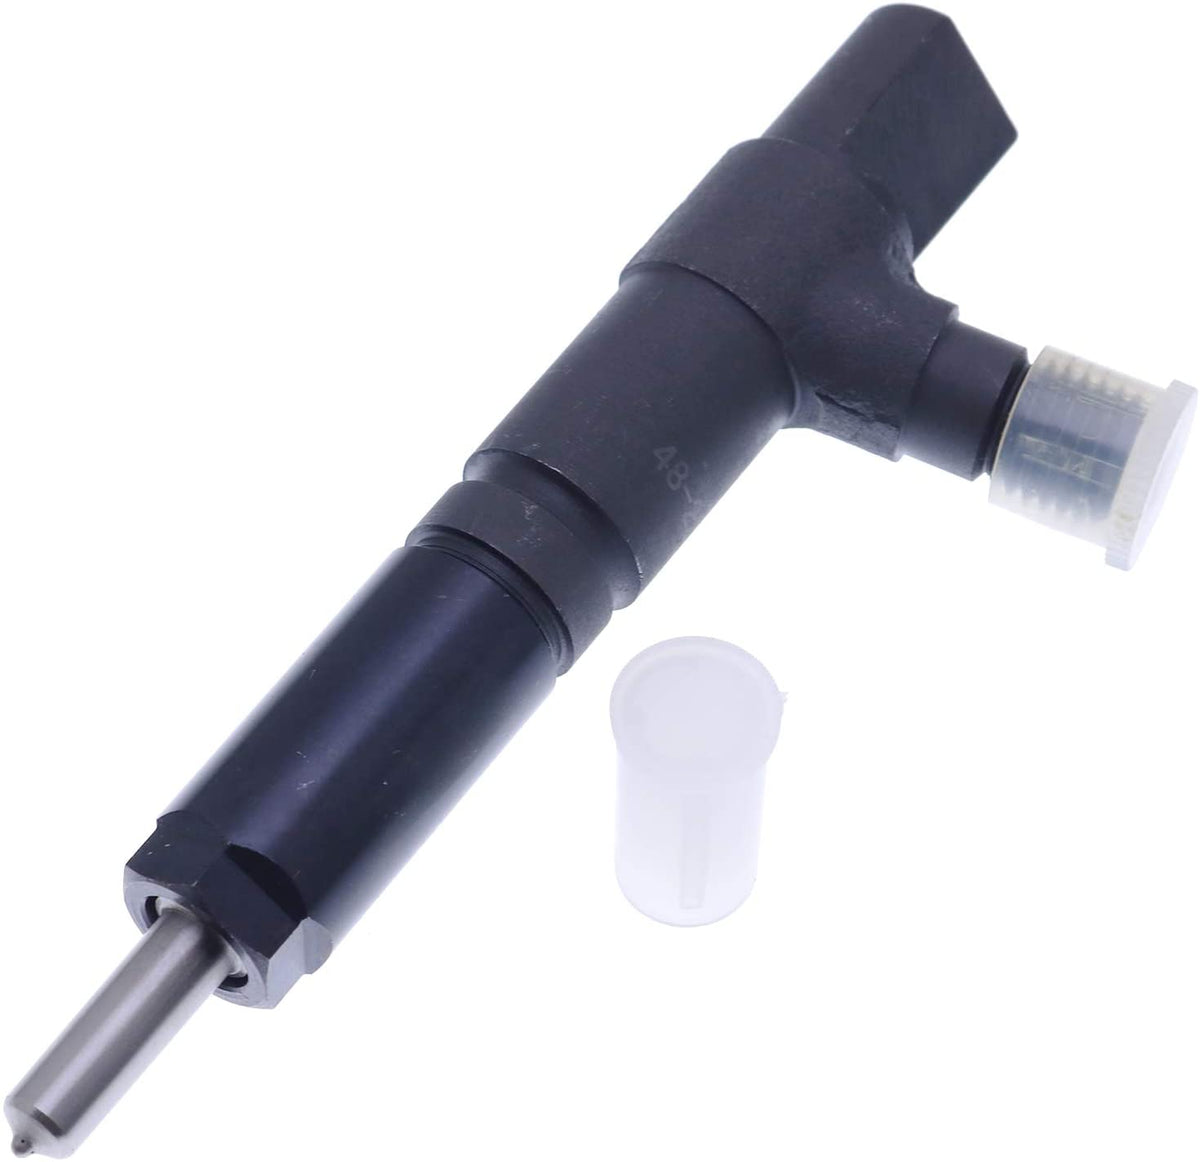 Fuel Injector 6685512 compatible with Bobcat B300 BL370 331 334 335 5600 S130 S150 S160 S175 S185 S510 T140 - KUDUPARTS